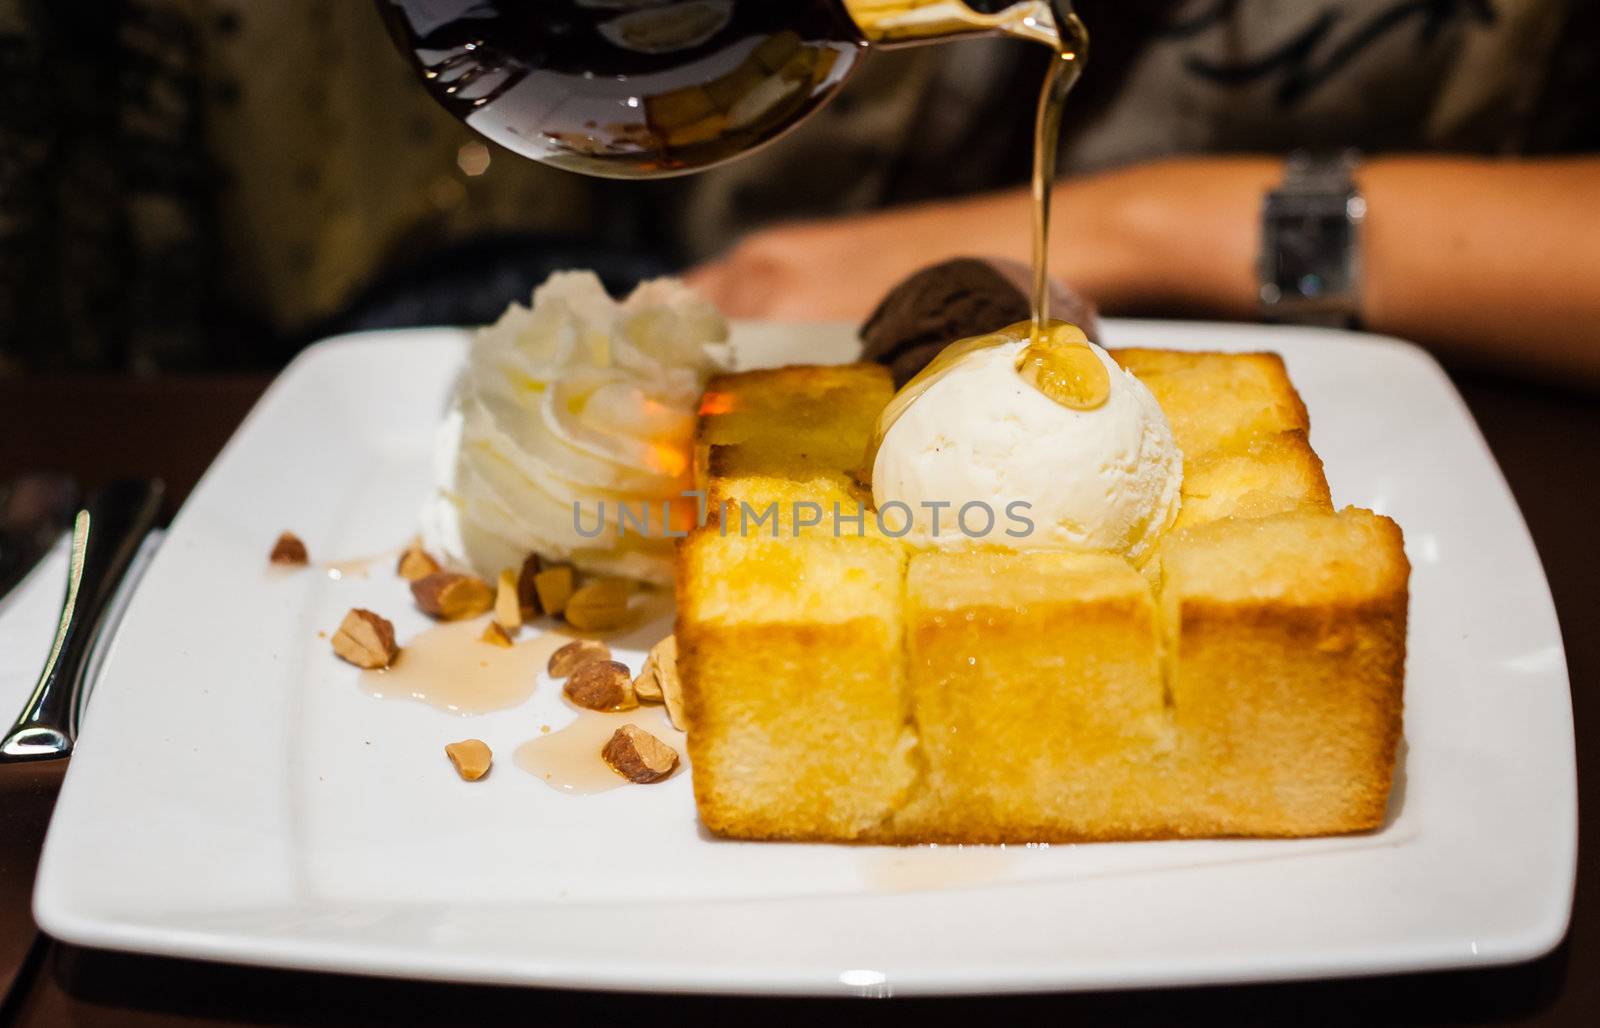 syrup being poured over a scoop of vanilla ice cream on toast